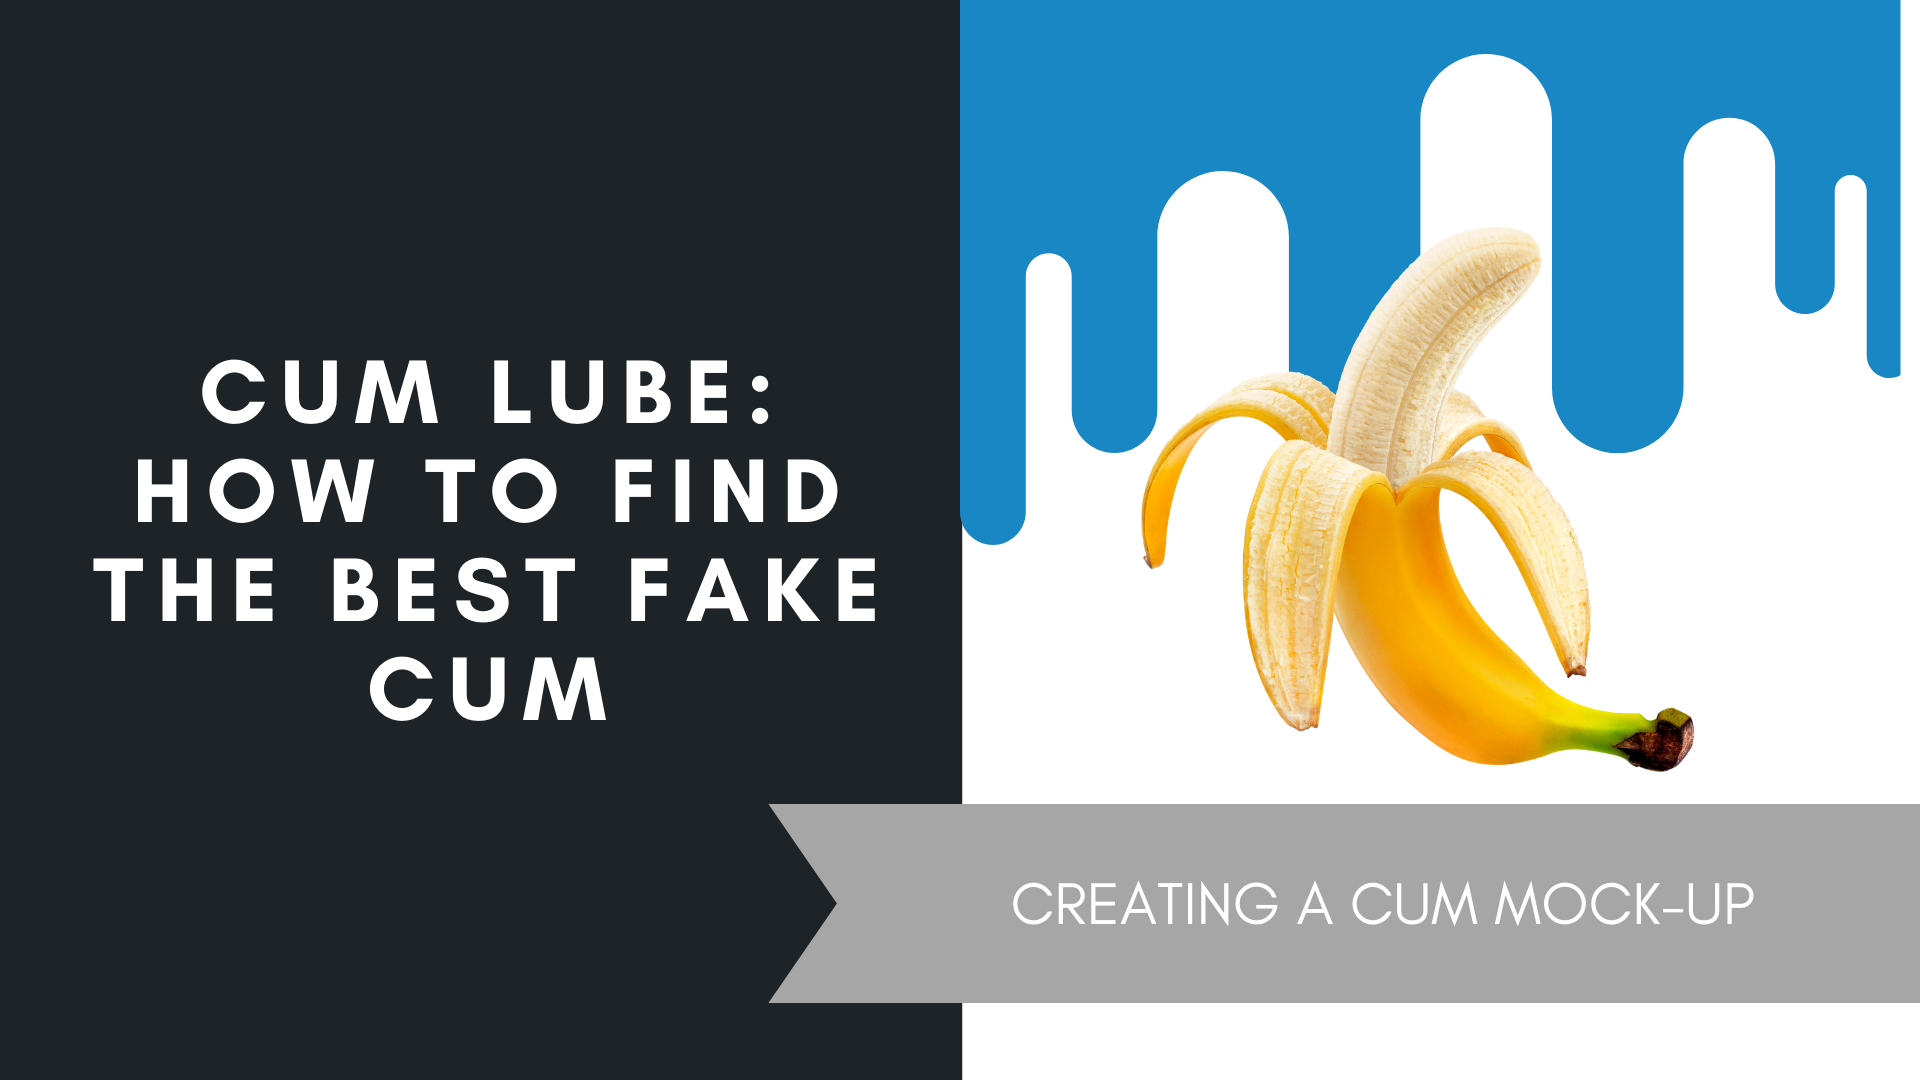 avelino sulit recommends How To Make Fake Edible Cum